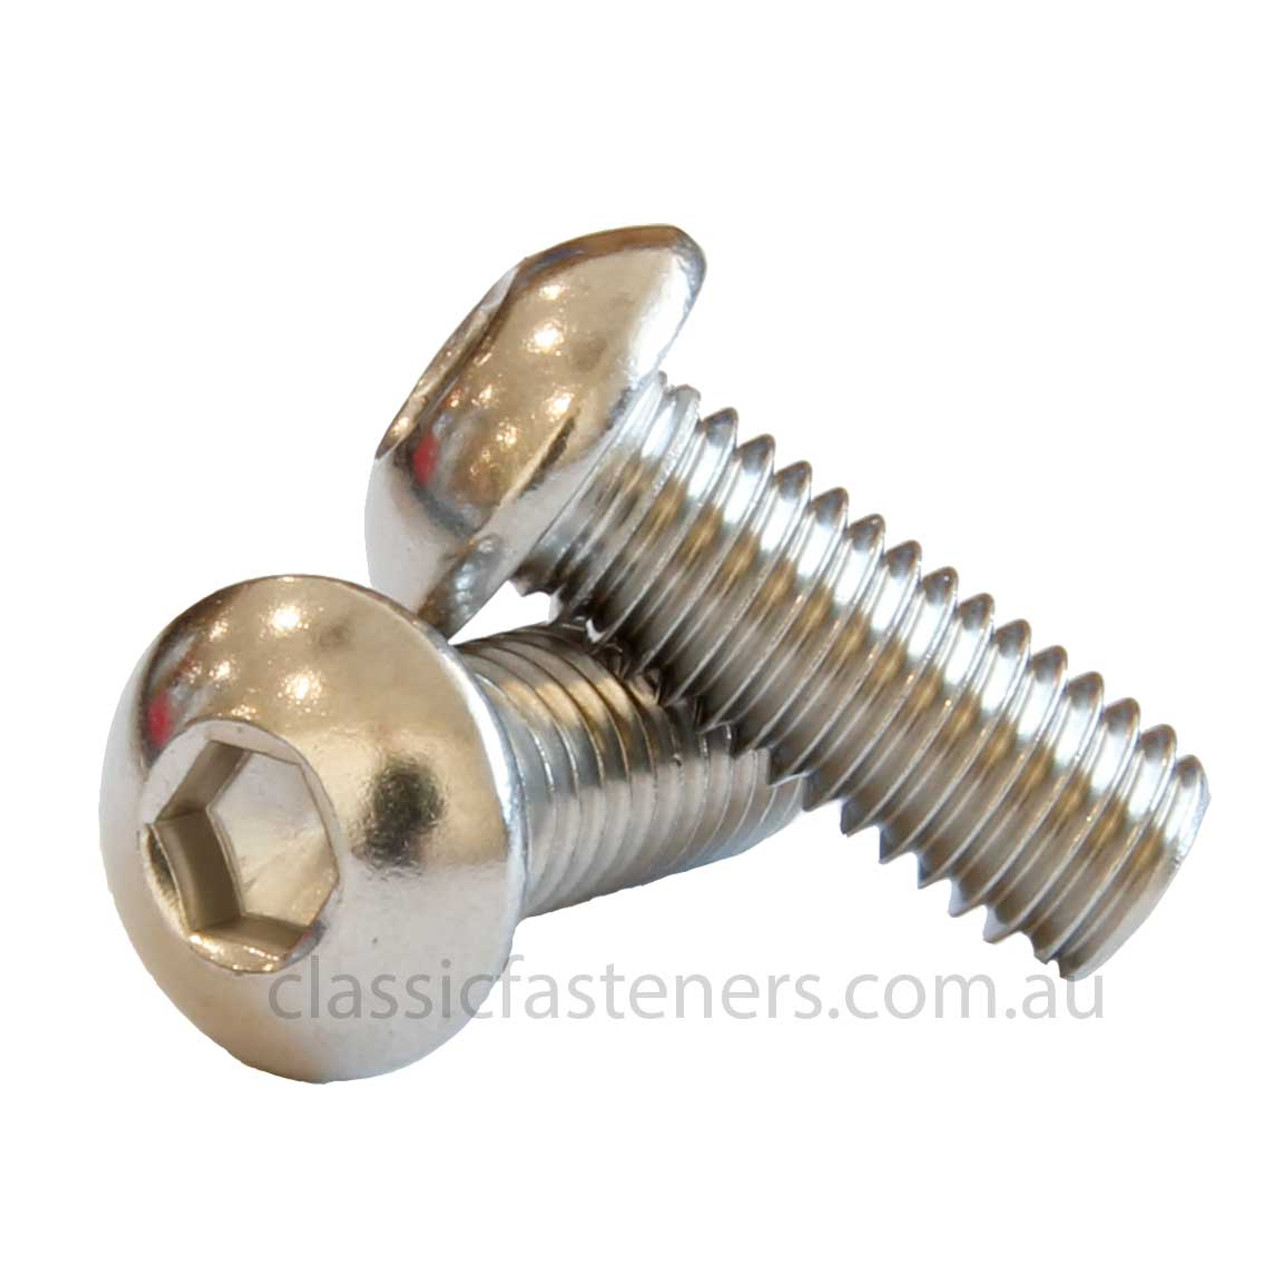 1/4-20 UNC x 1/2 Button Head Socket Screw Stainless 304 Classic Fasteners